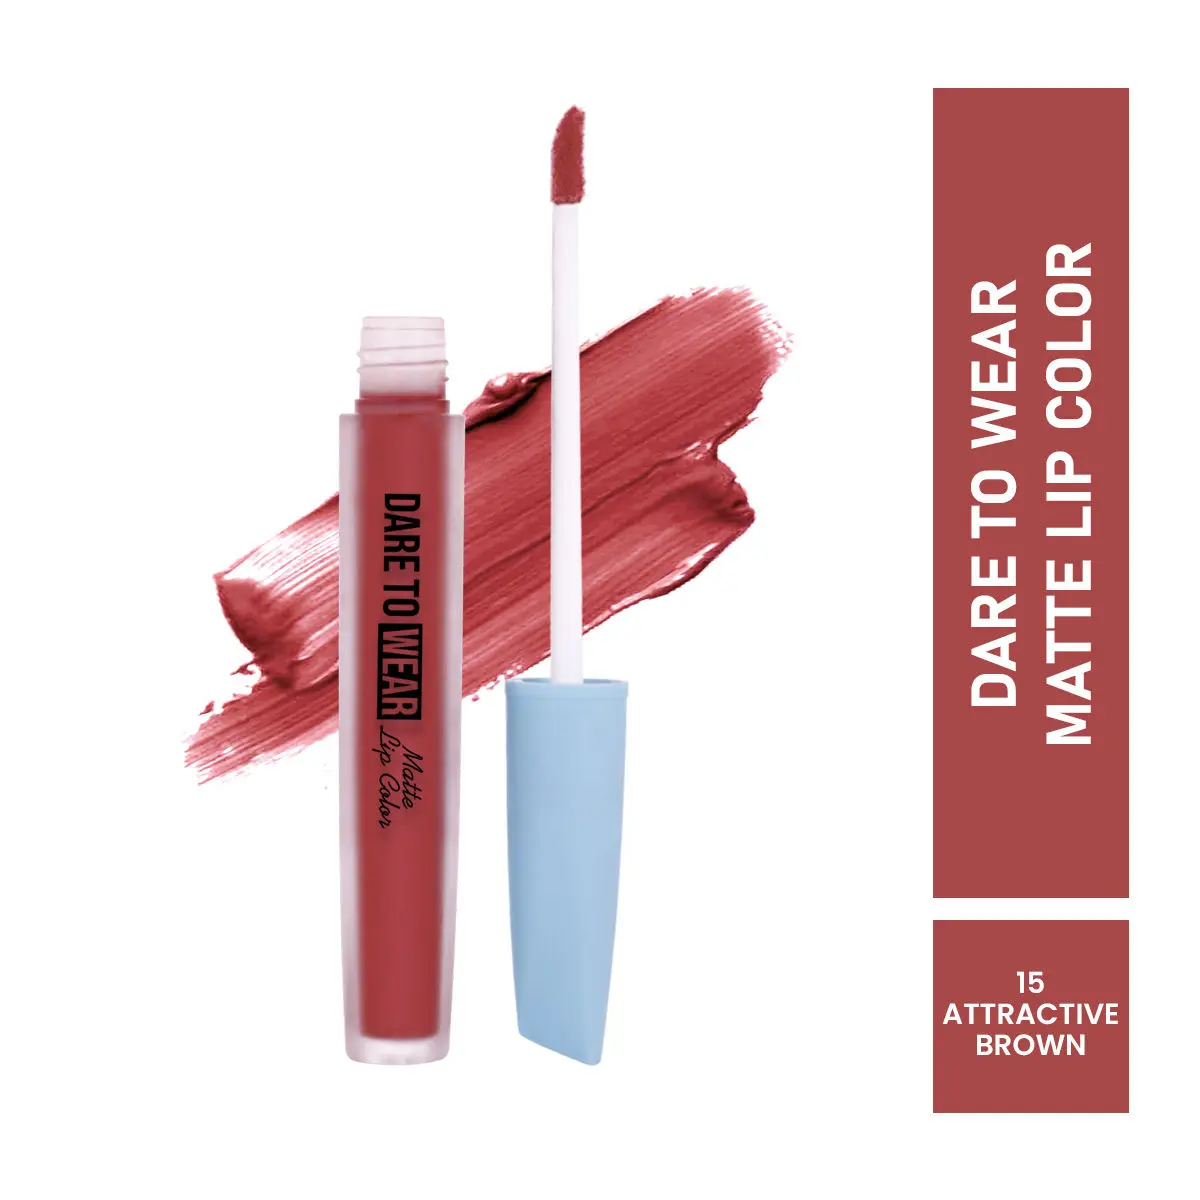 Mattlook Dare To Wear Matte Lip Color, Highly Pigmented, Smooth Application, Waterproof, Non Transfer & Long Lasting, Finish Matte, Attractive Brown (3.5ml)